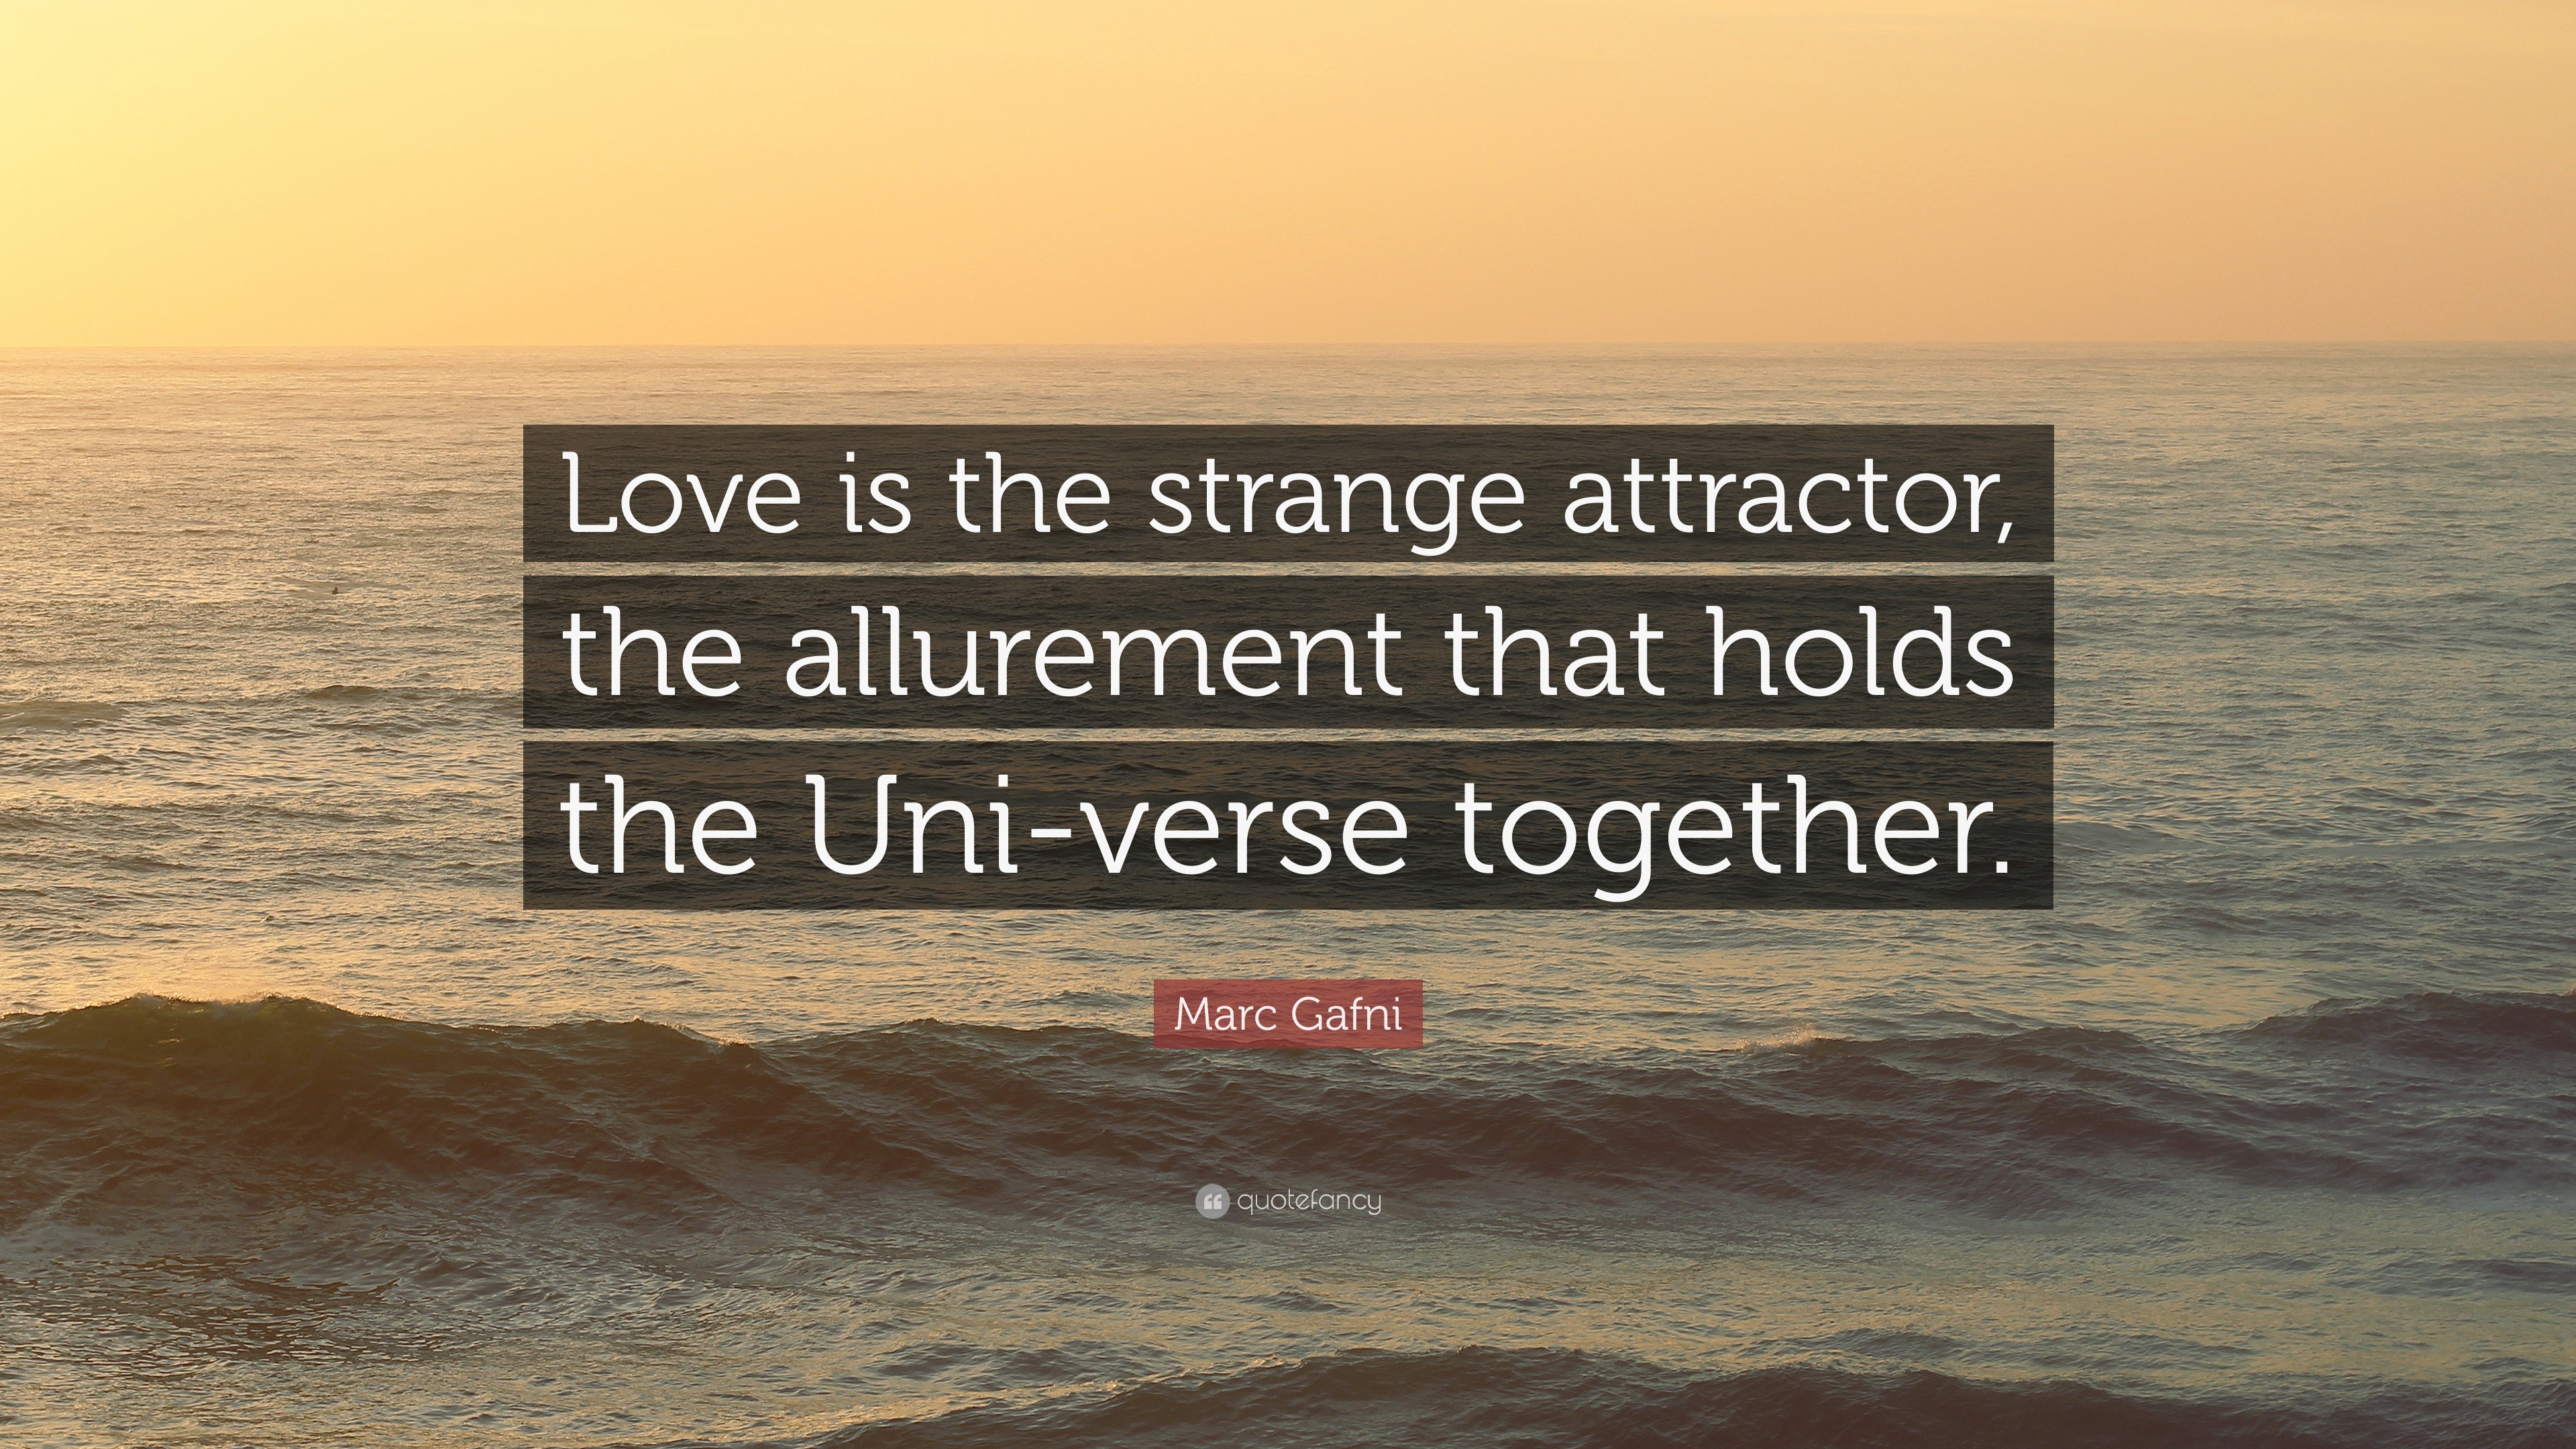 Marc Gafni Quote: “Love is the strange attractor, the allurement that holds  the Uni-verse together.”